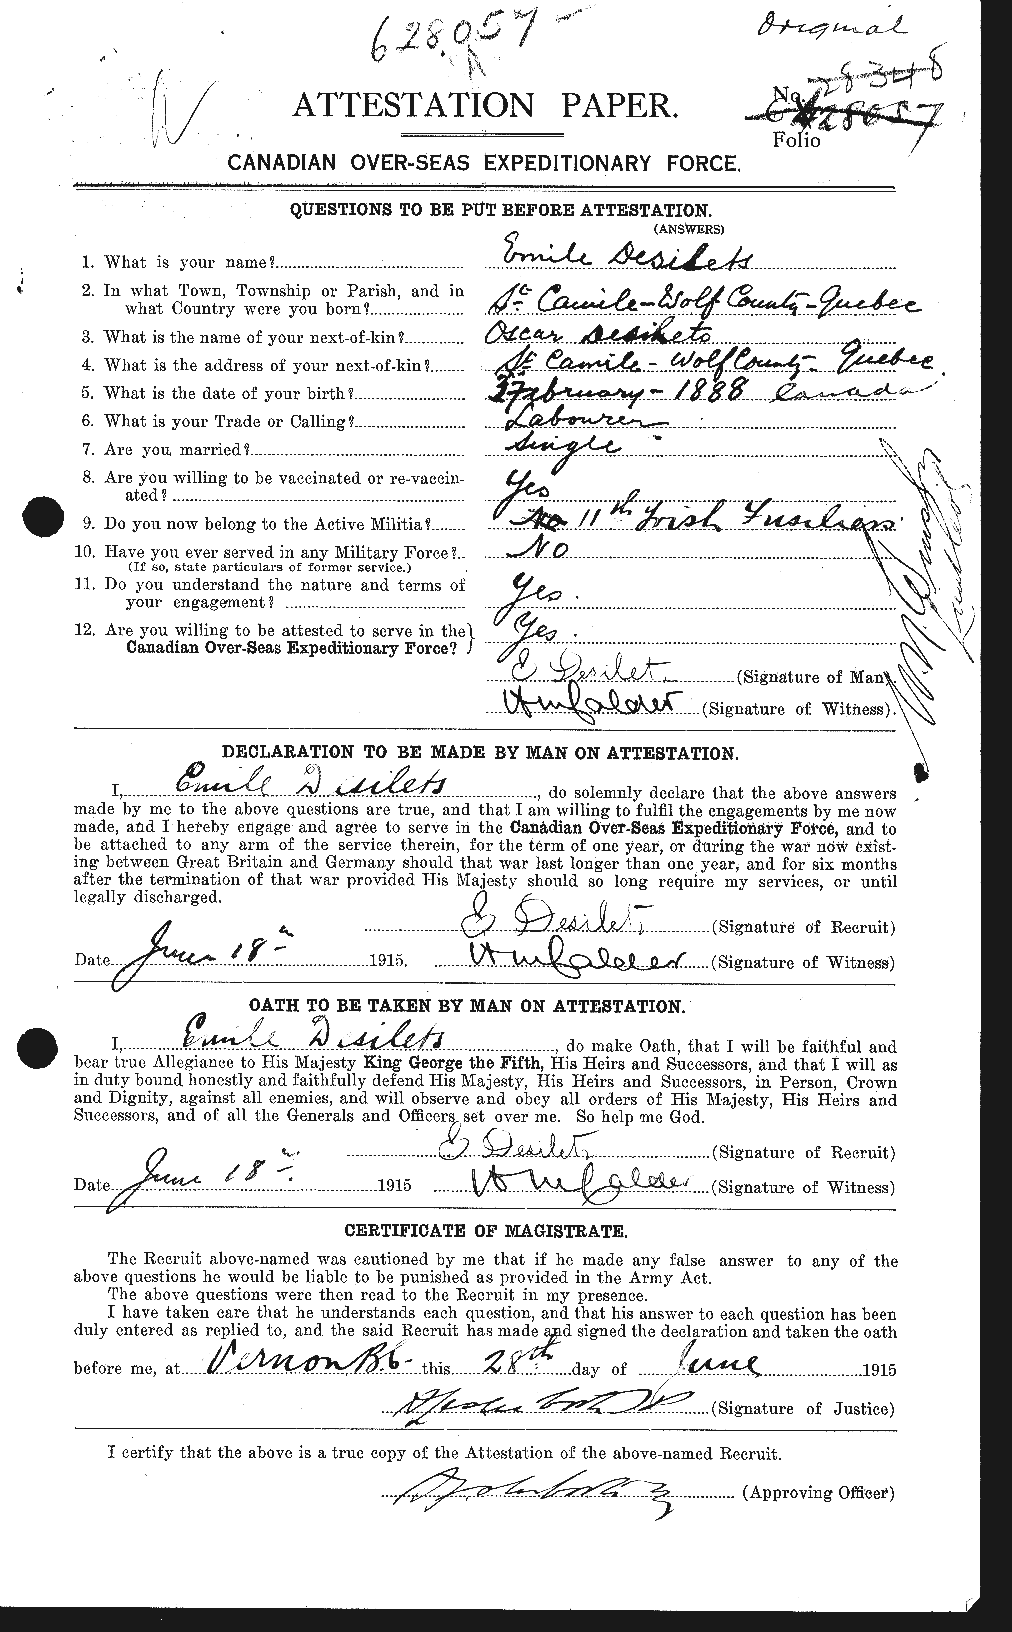 Personnel Records of the First World War - CEF 288179a